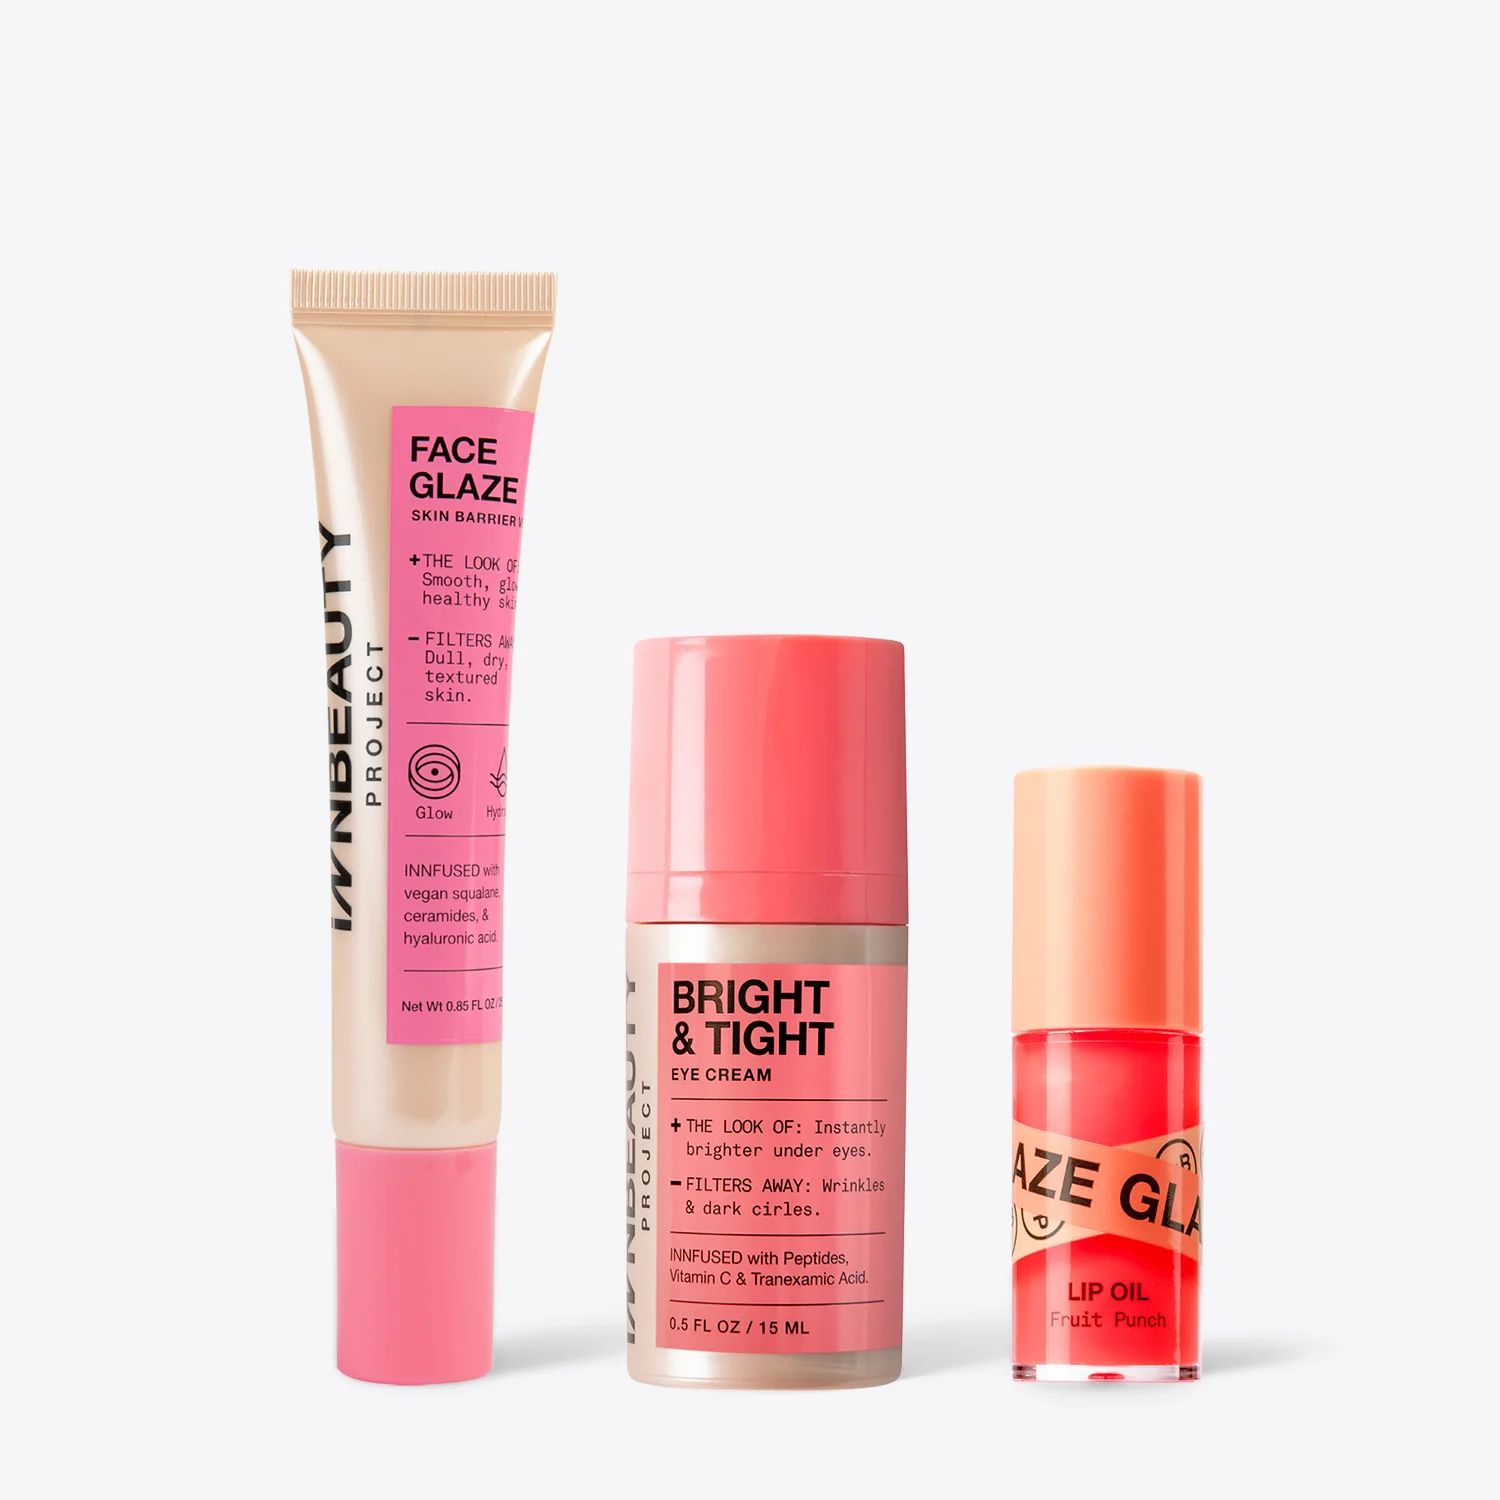 Sunkissed Set | Bright & Tight, Face Glaze, & Fruit Punch Lip Oil | InnBeauty Project